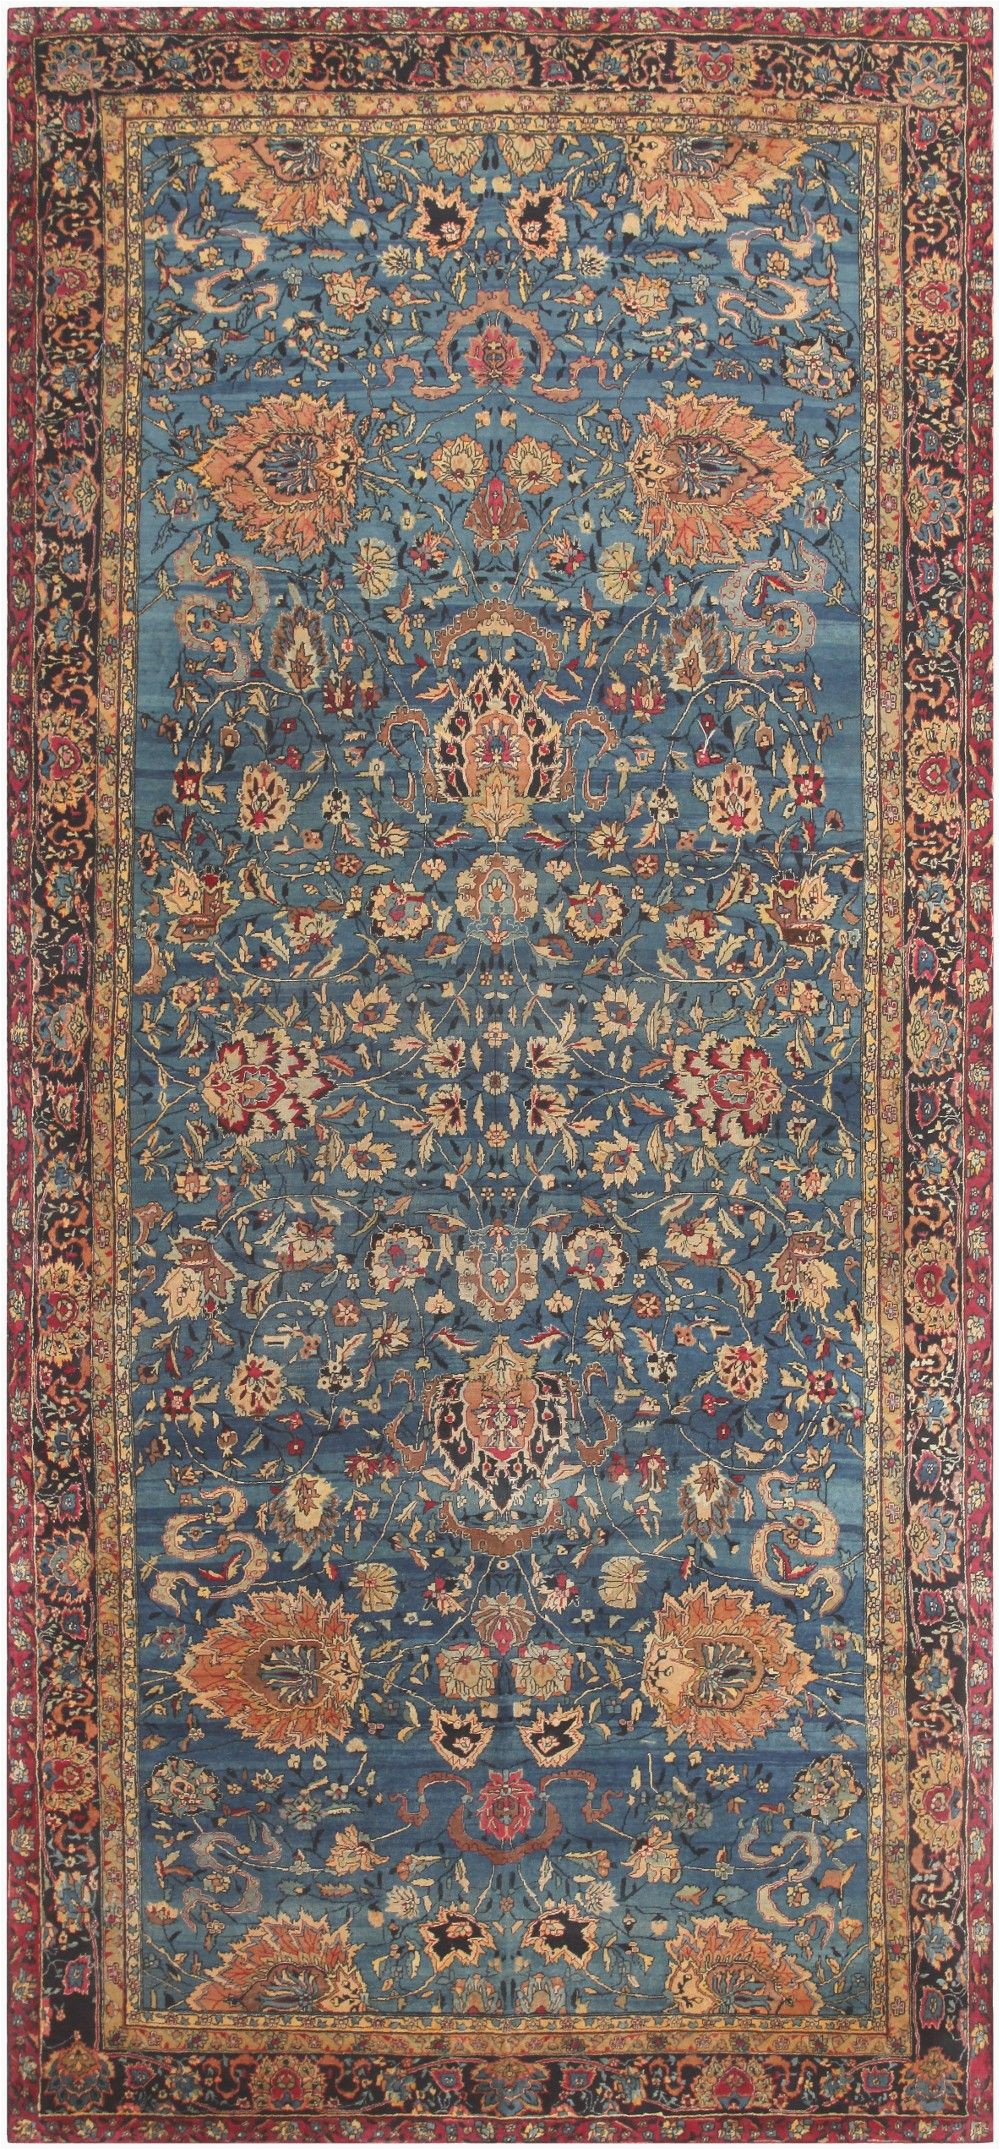 Brown and Blue Rugs for Sale Antique Rugs